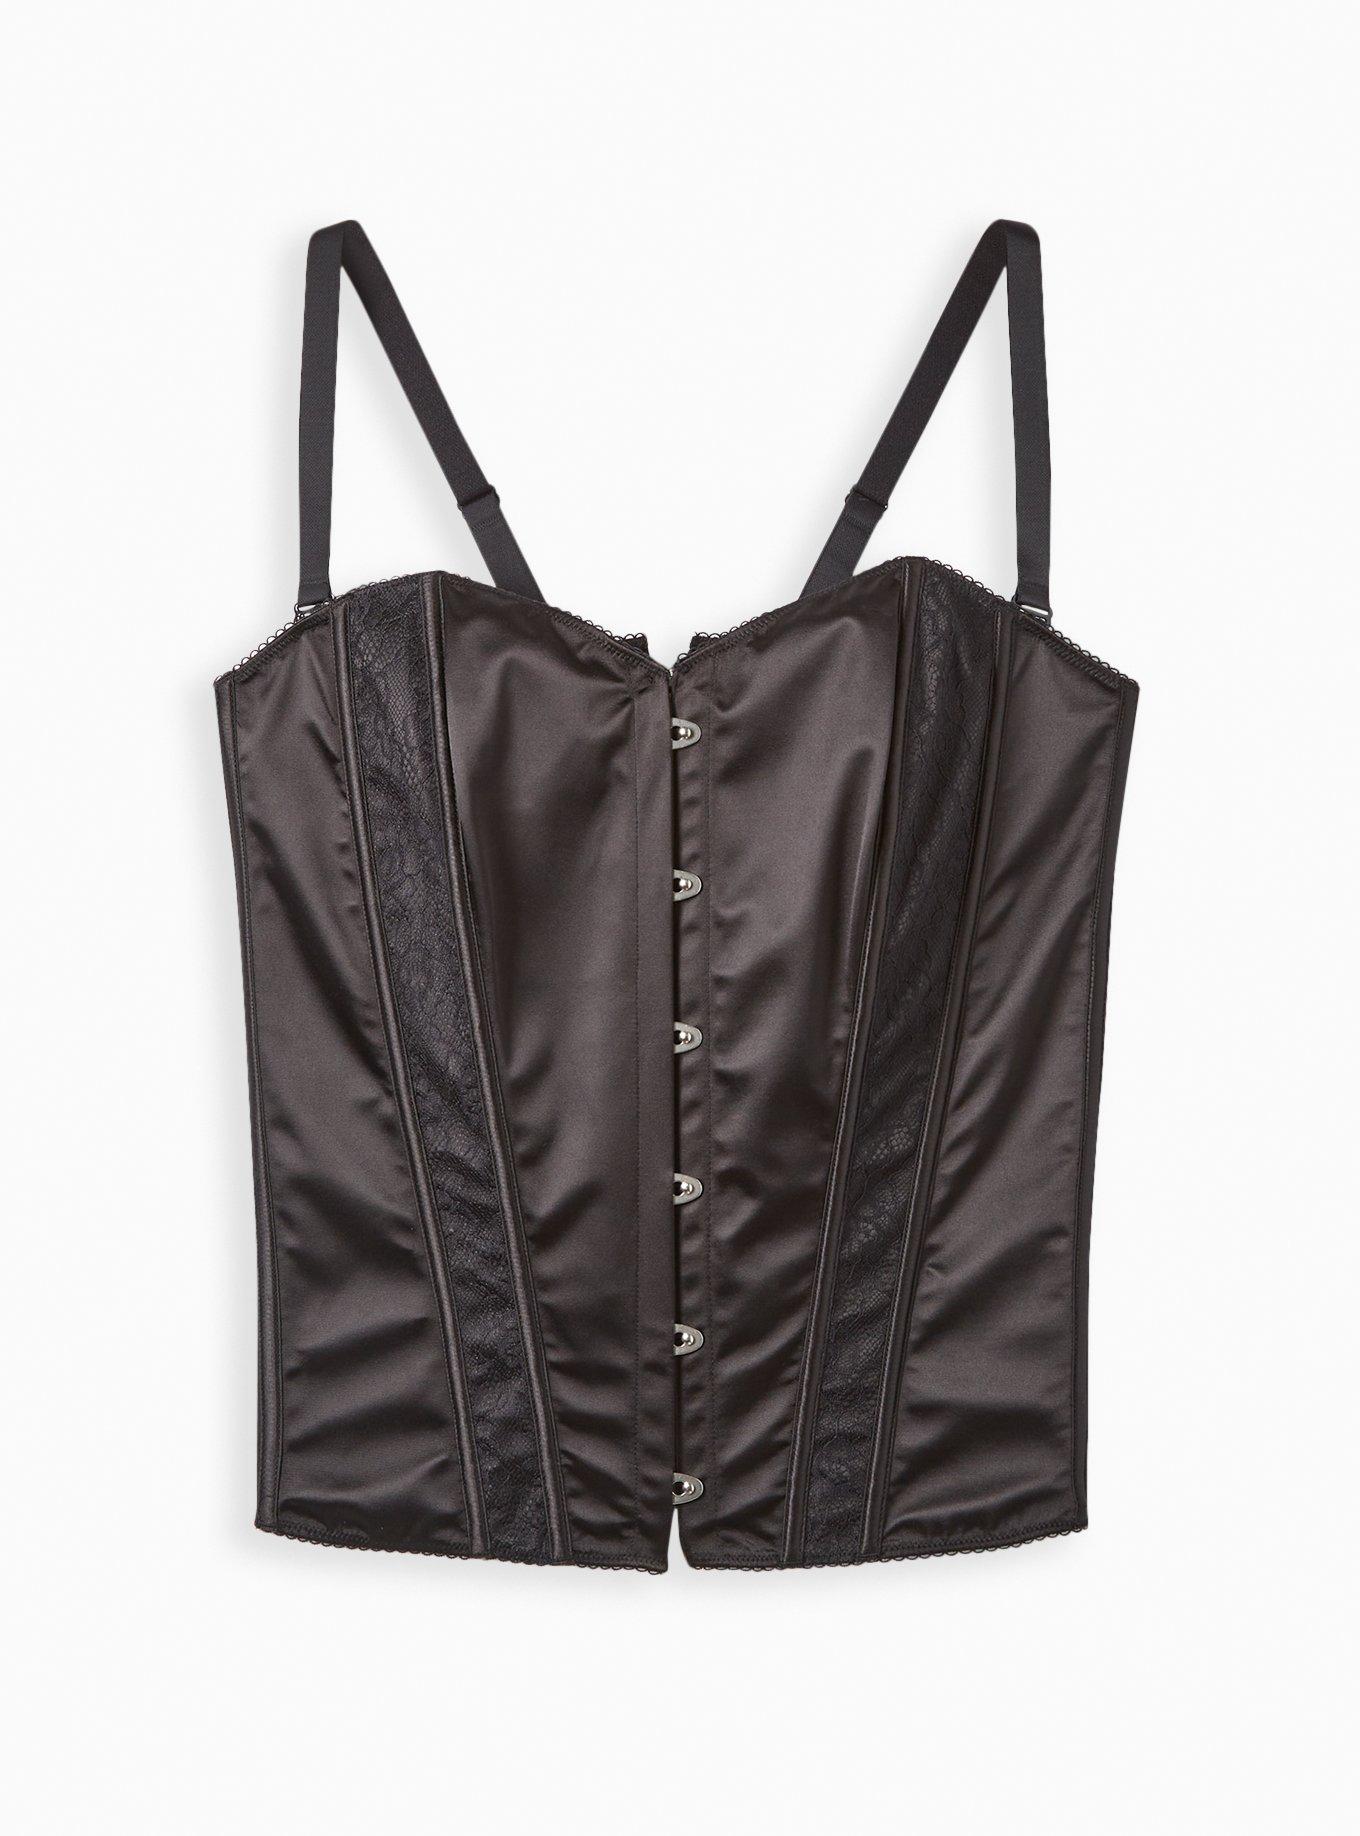 Out From Under Modern Love Corset  Urban Outfitters New Zealand -  Clothing, Music, Home & Accessories